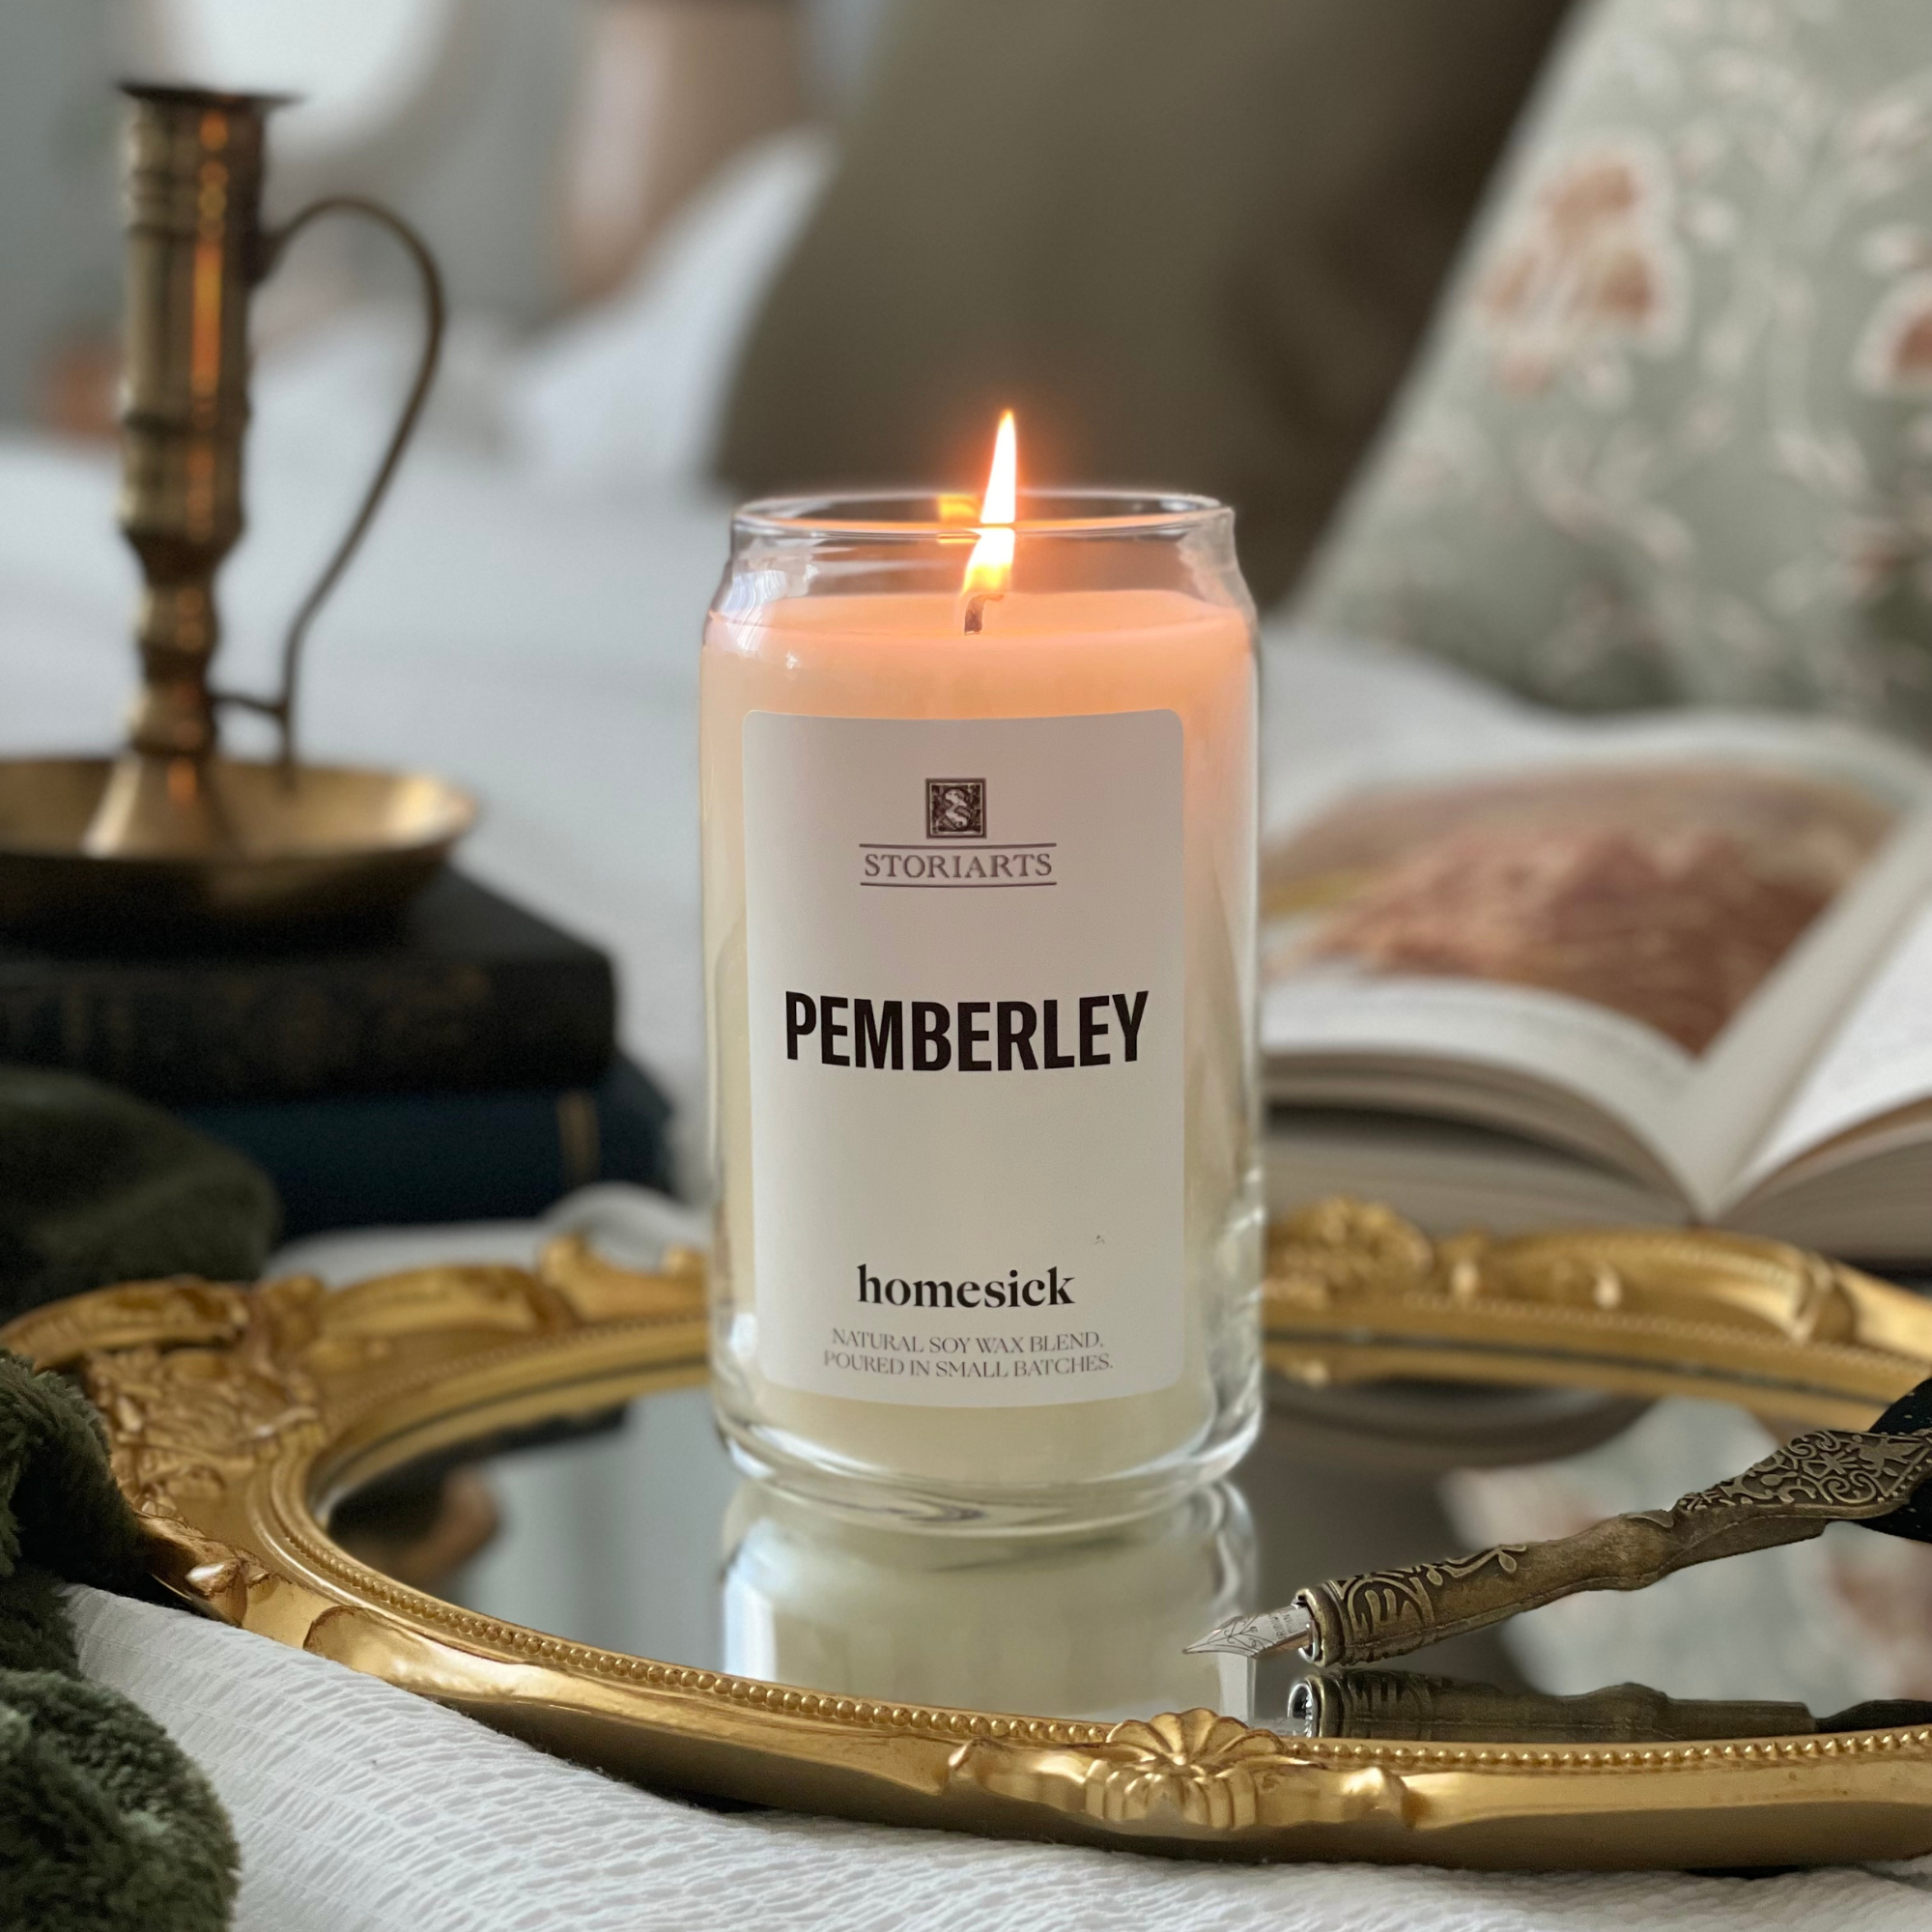 Pemberley Homesick Candle - Storiarts